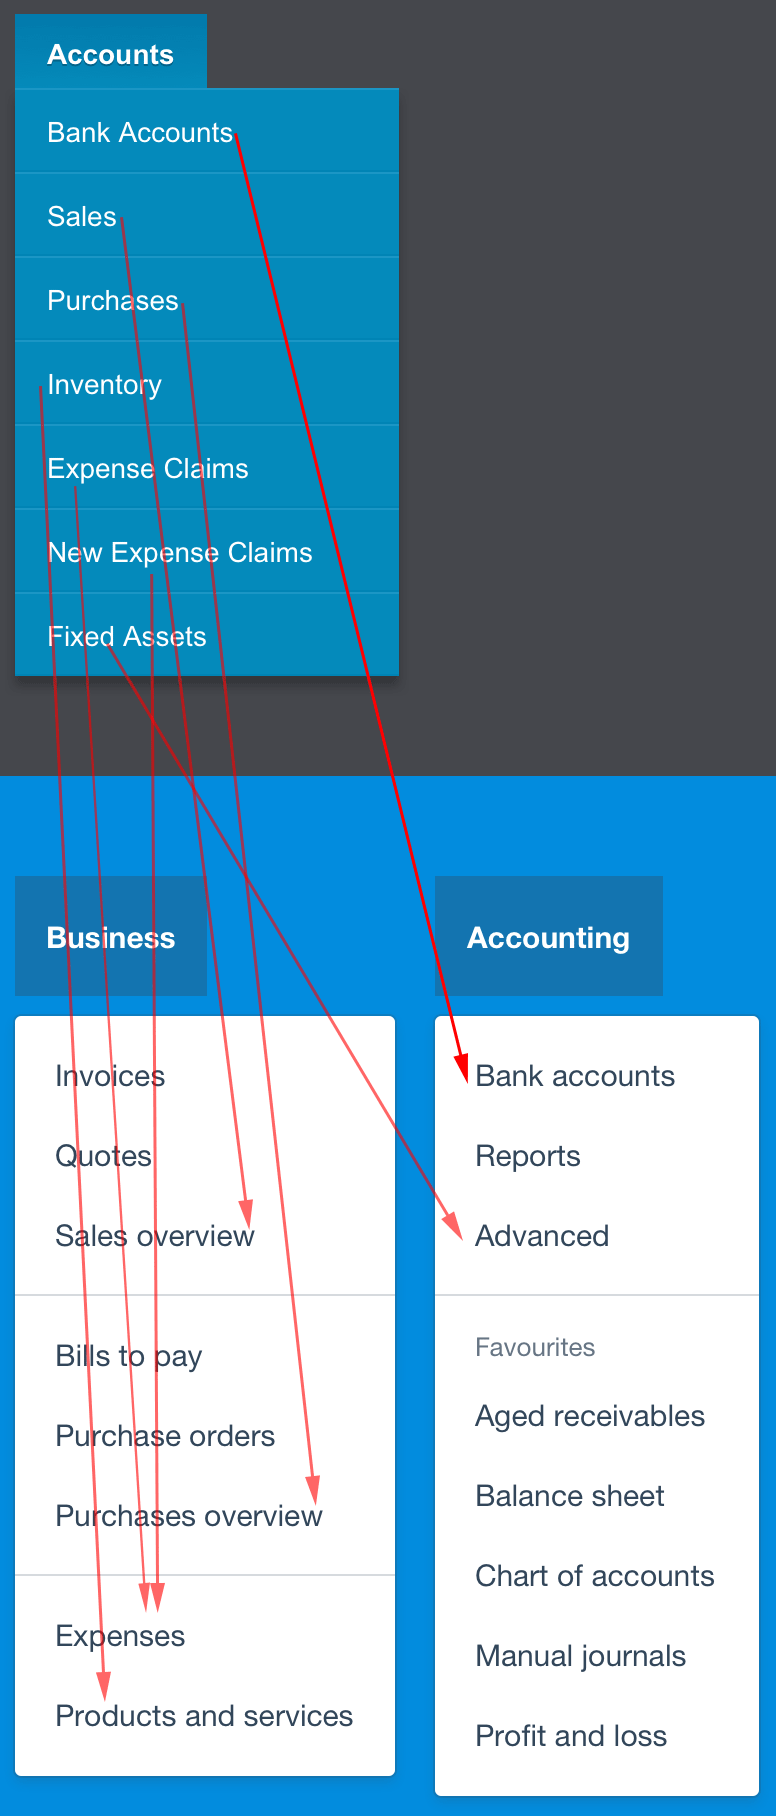 Xero New Interface Accounts: Bank Accounts, Inventory, Expense Claims, Fixed Assets